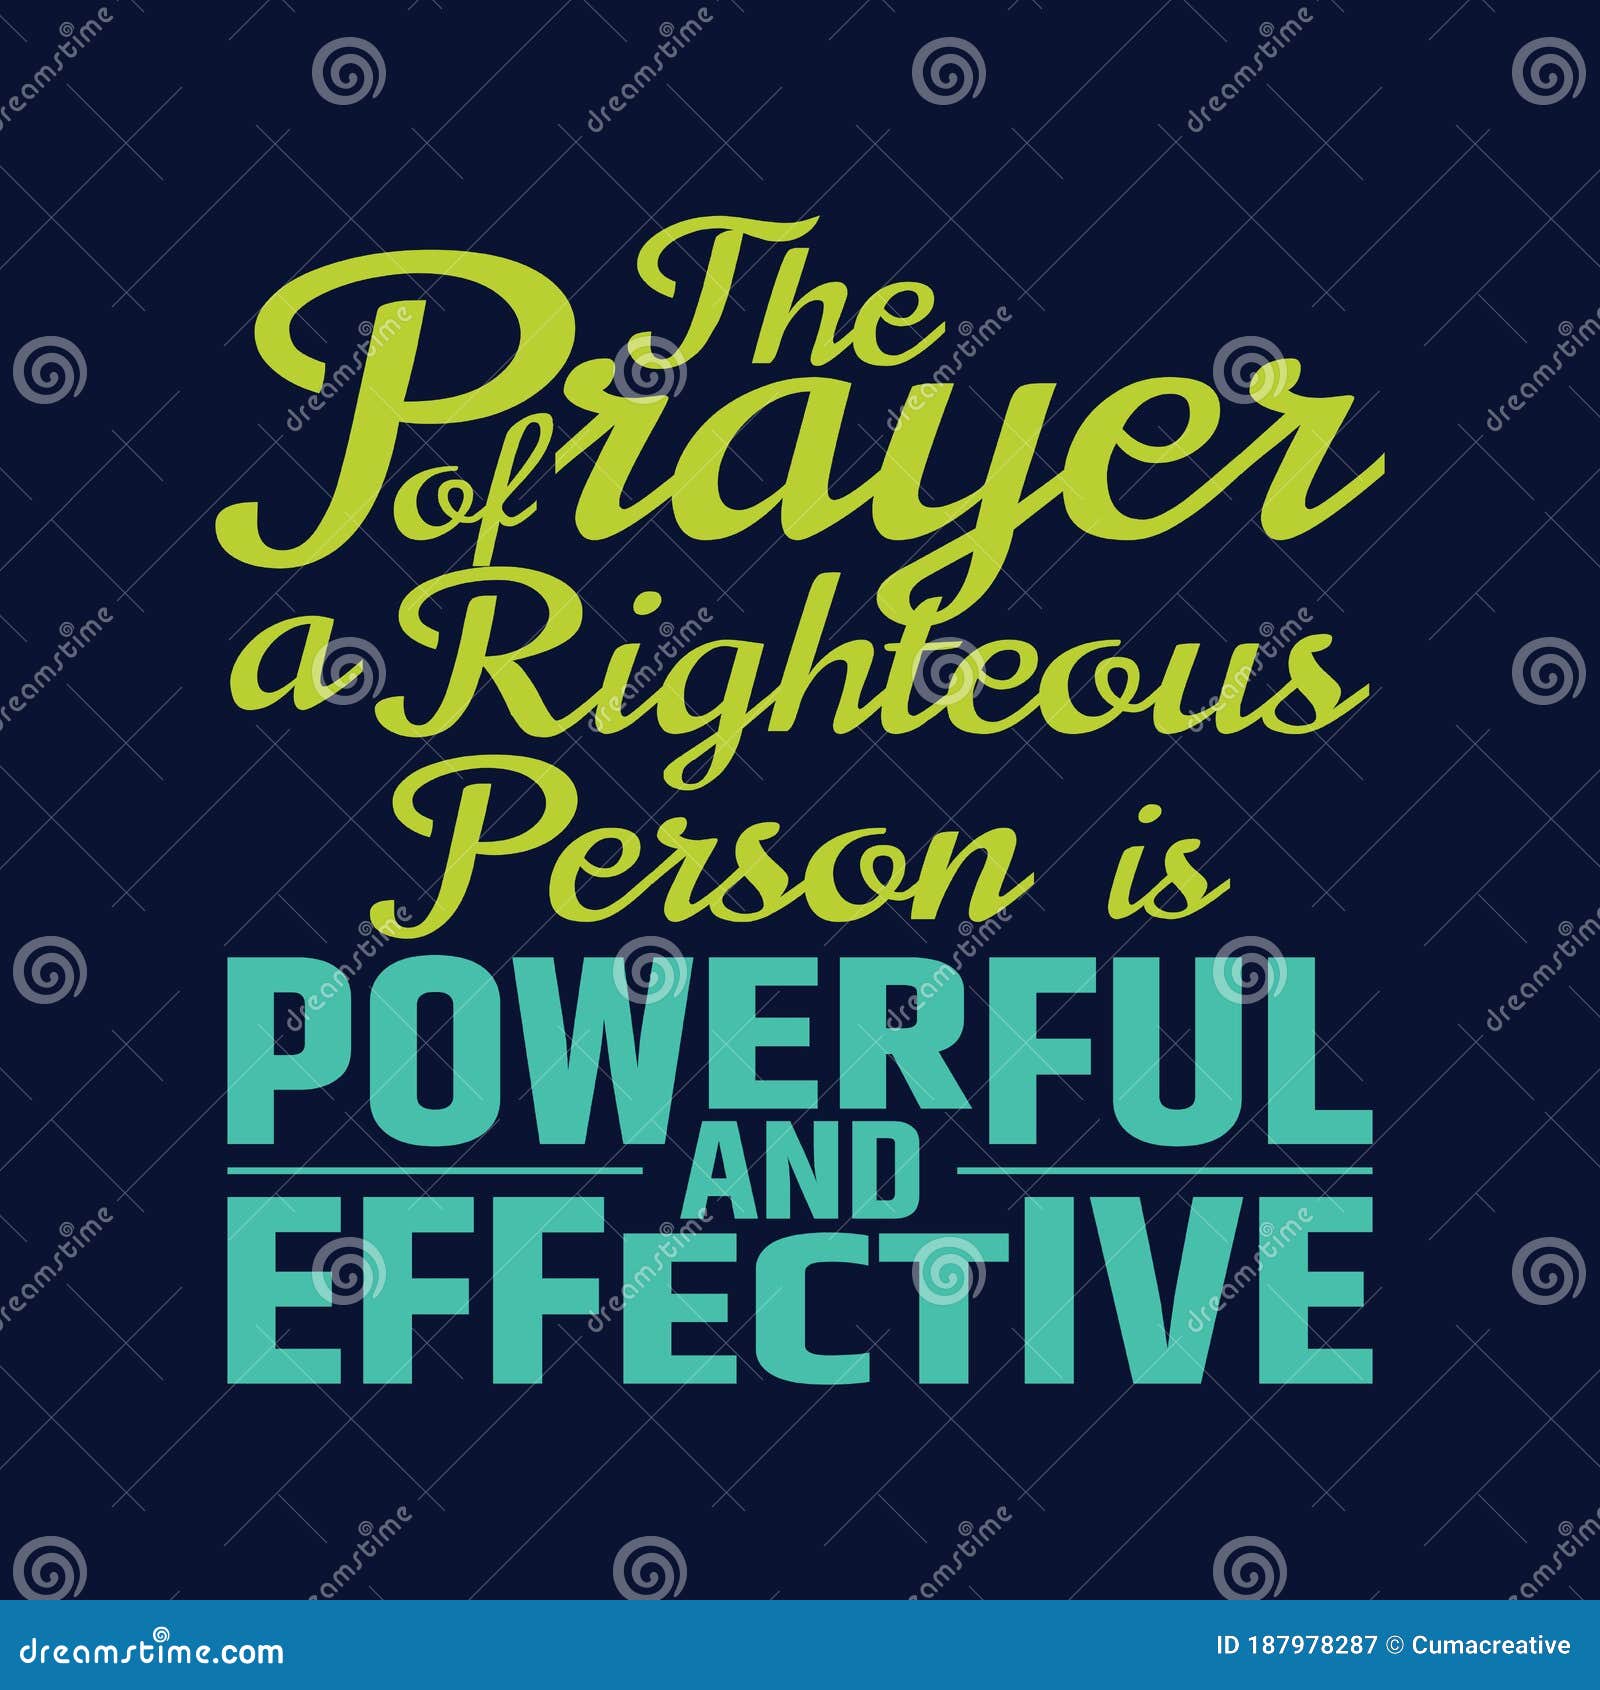 best bible quotes about the power of prayer - the prayer of a righteous person is powerful and effective